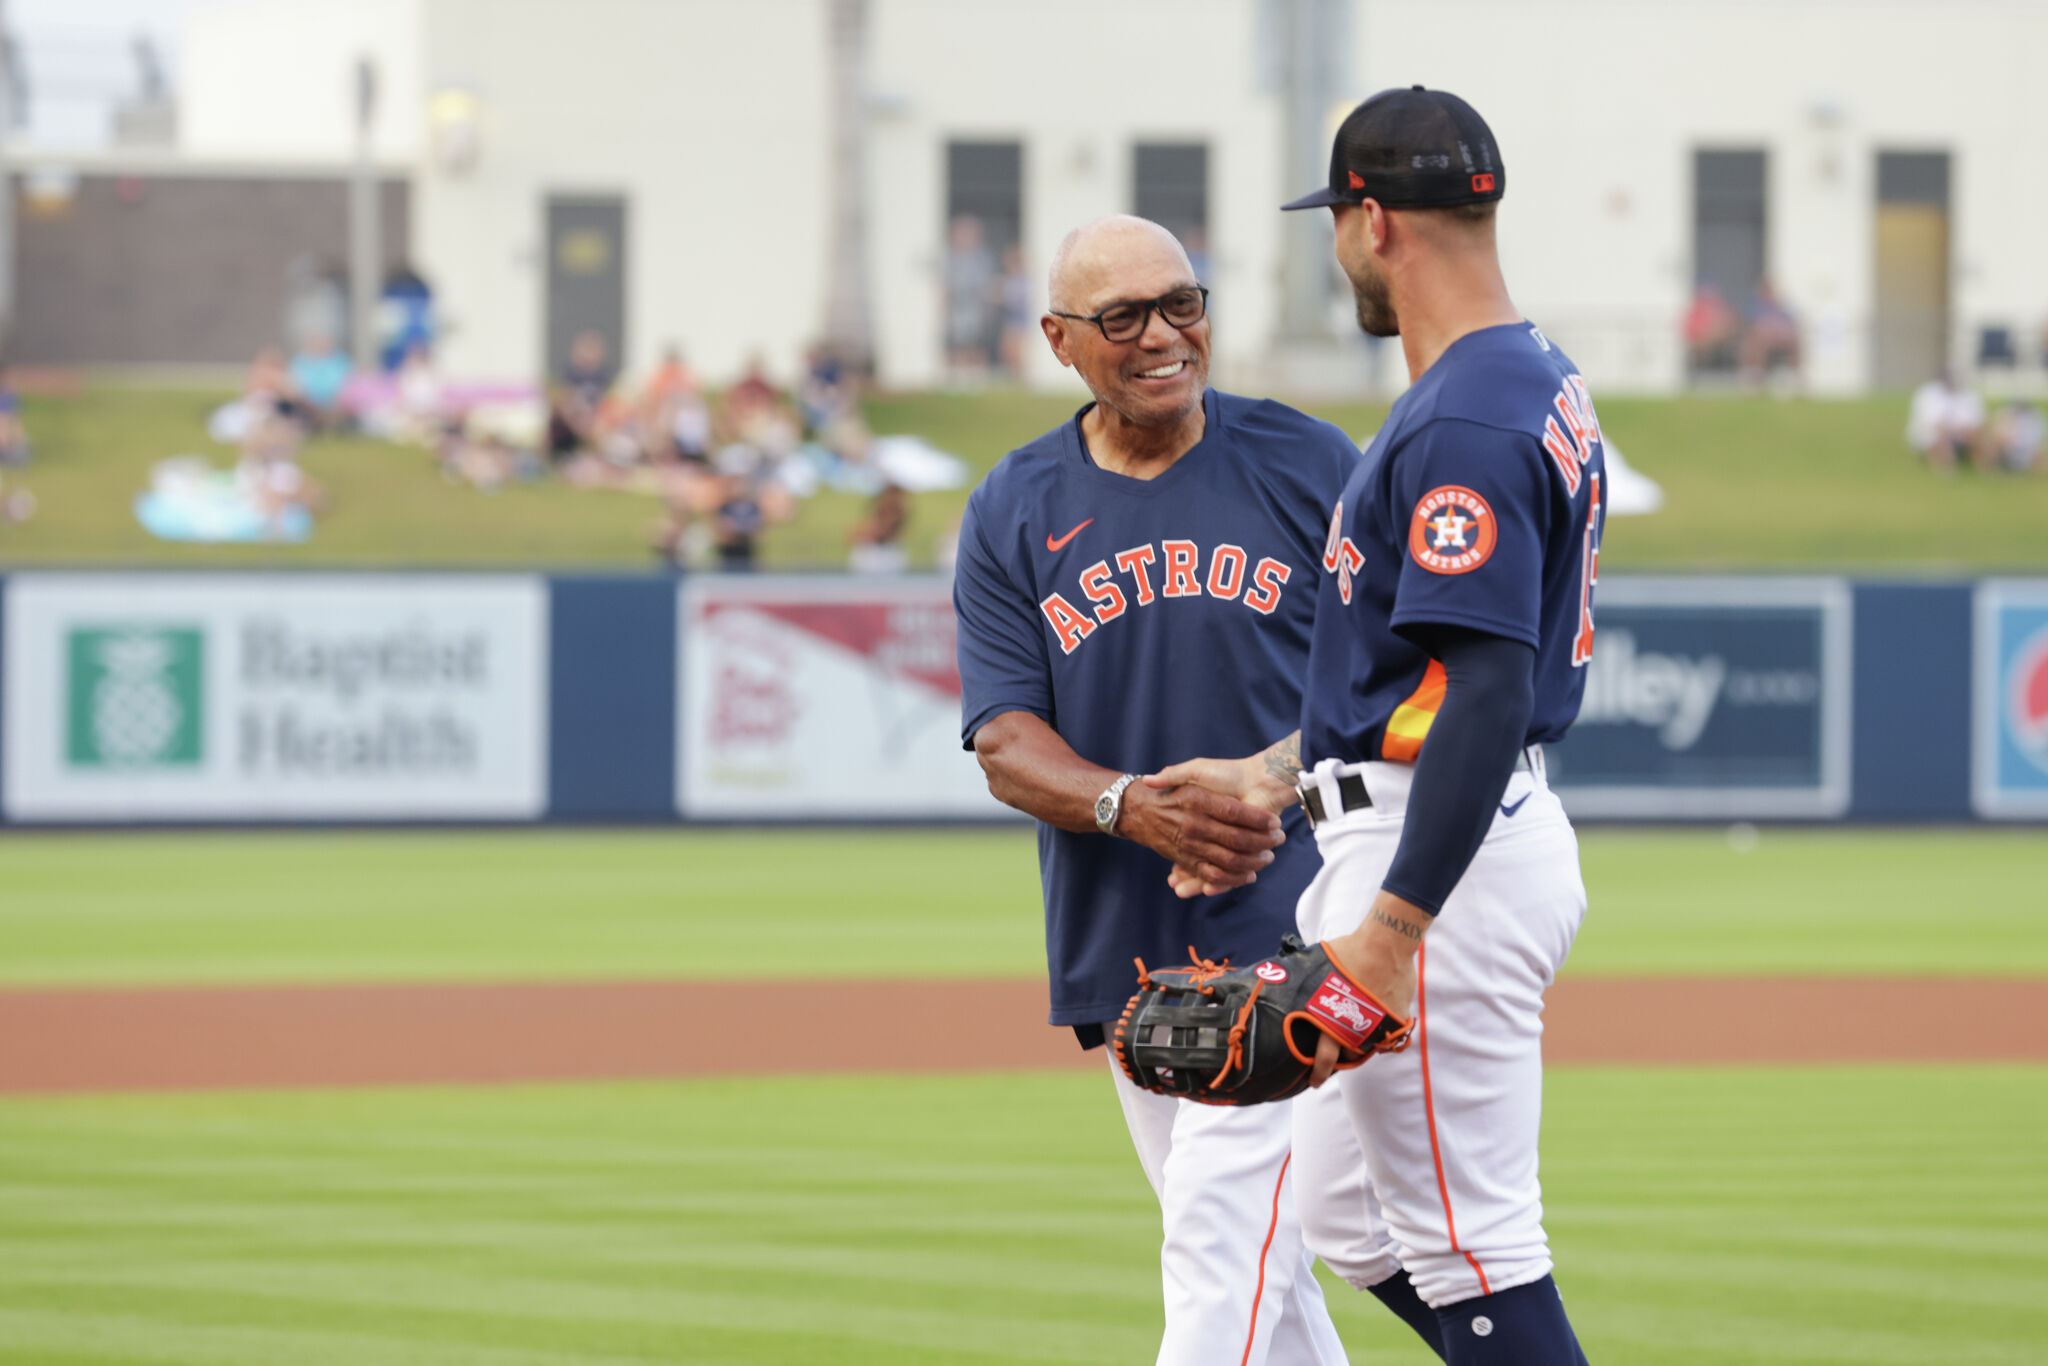 Reggie Jackson explains why he left NY to join the Astros